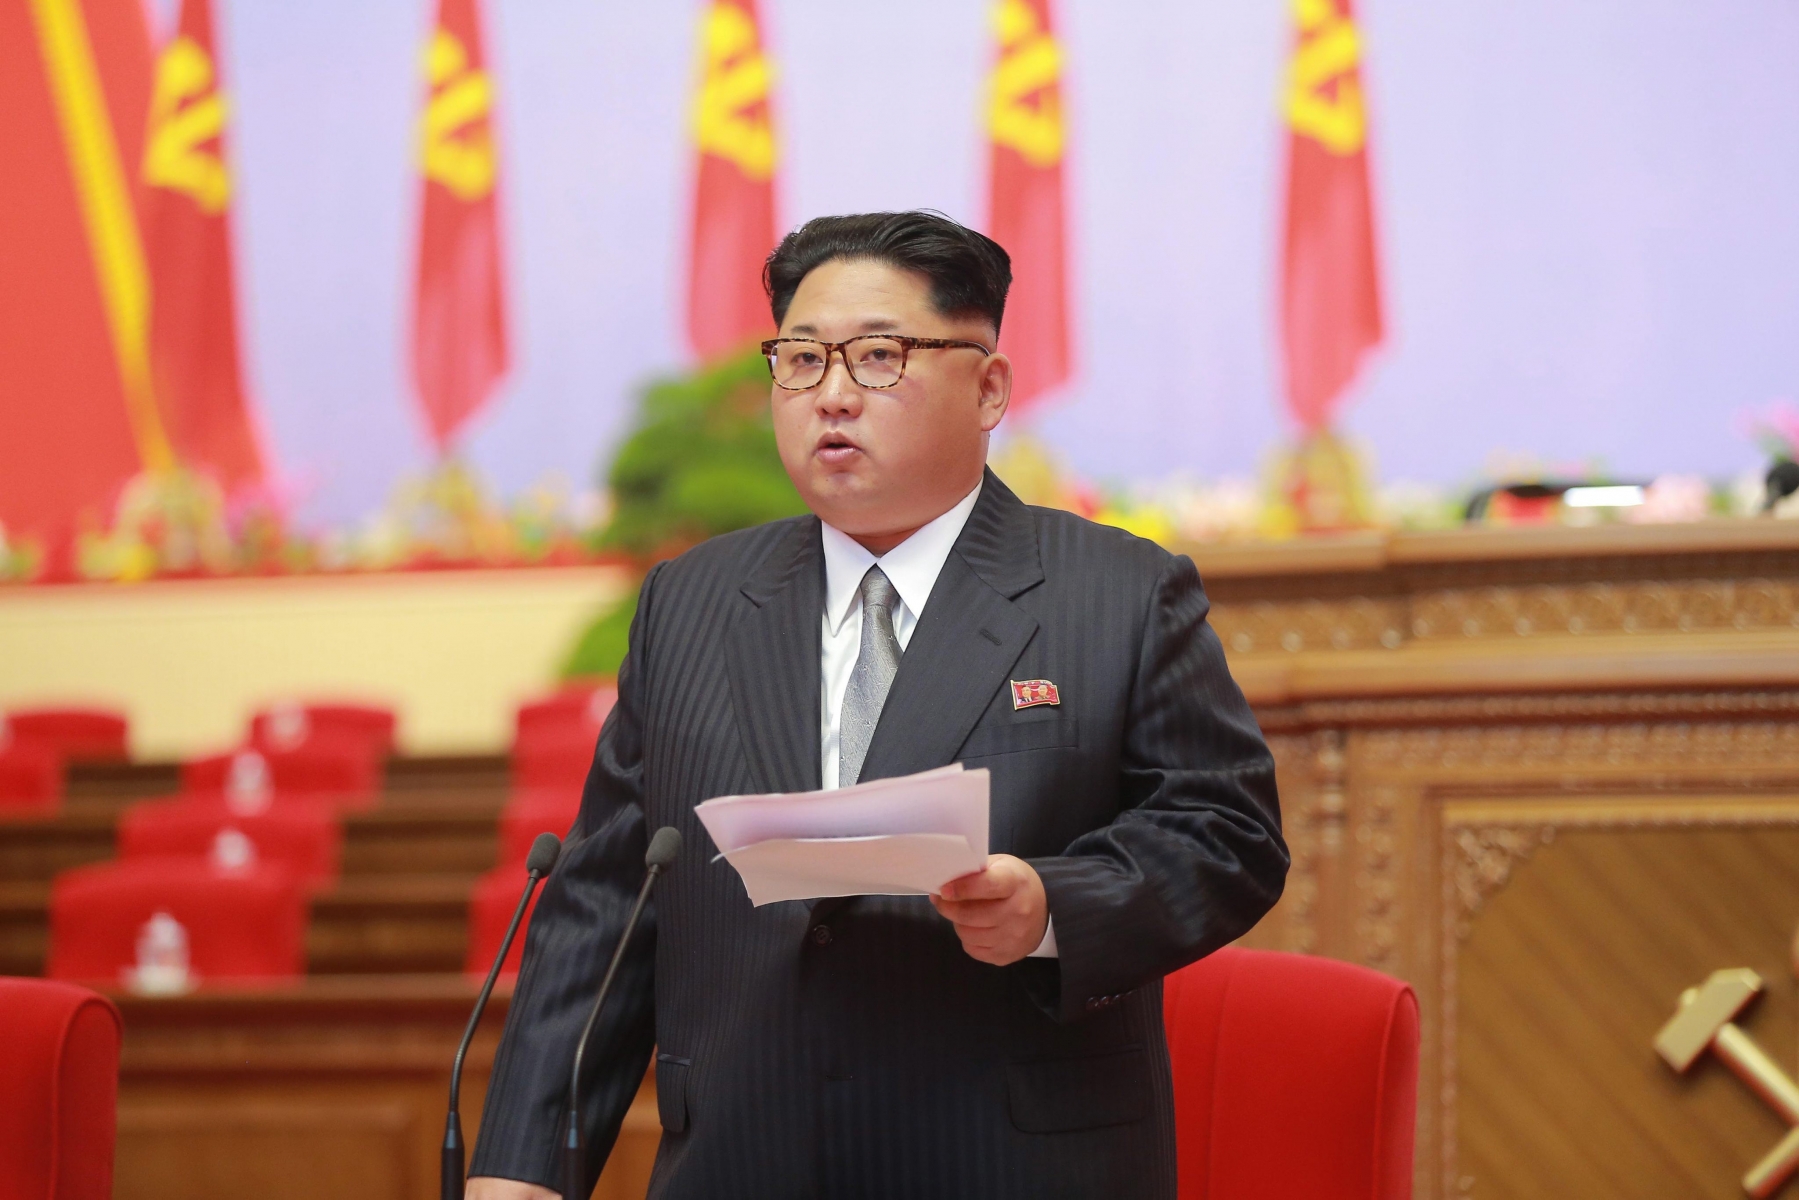 epa05292567 A picture made available on 07 May 2016 by North Korea's Korean Central News Agency (KCNA) shows North Korean leader Kim Jong-un speaking during the 7th Congress of the Workers' Party of Korea (WPK), the first such congress held in 36 years since 1980, in Pyongyang, North Korea, 06 May 2016.  EPA/KCNA NORTH KOREA PARTY CONGRESS